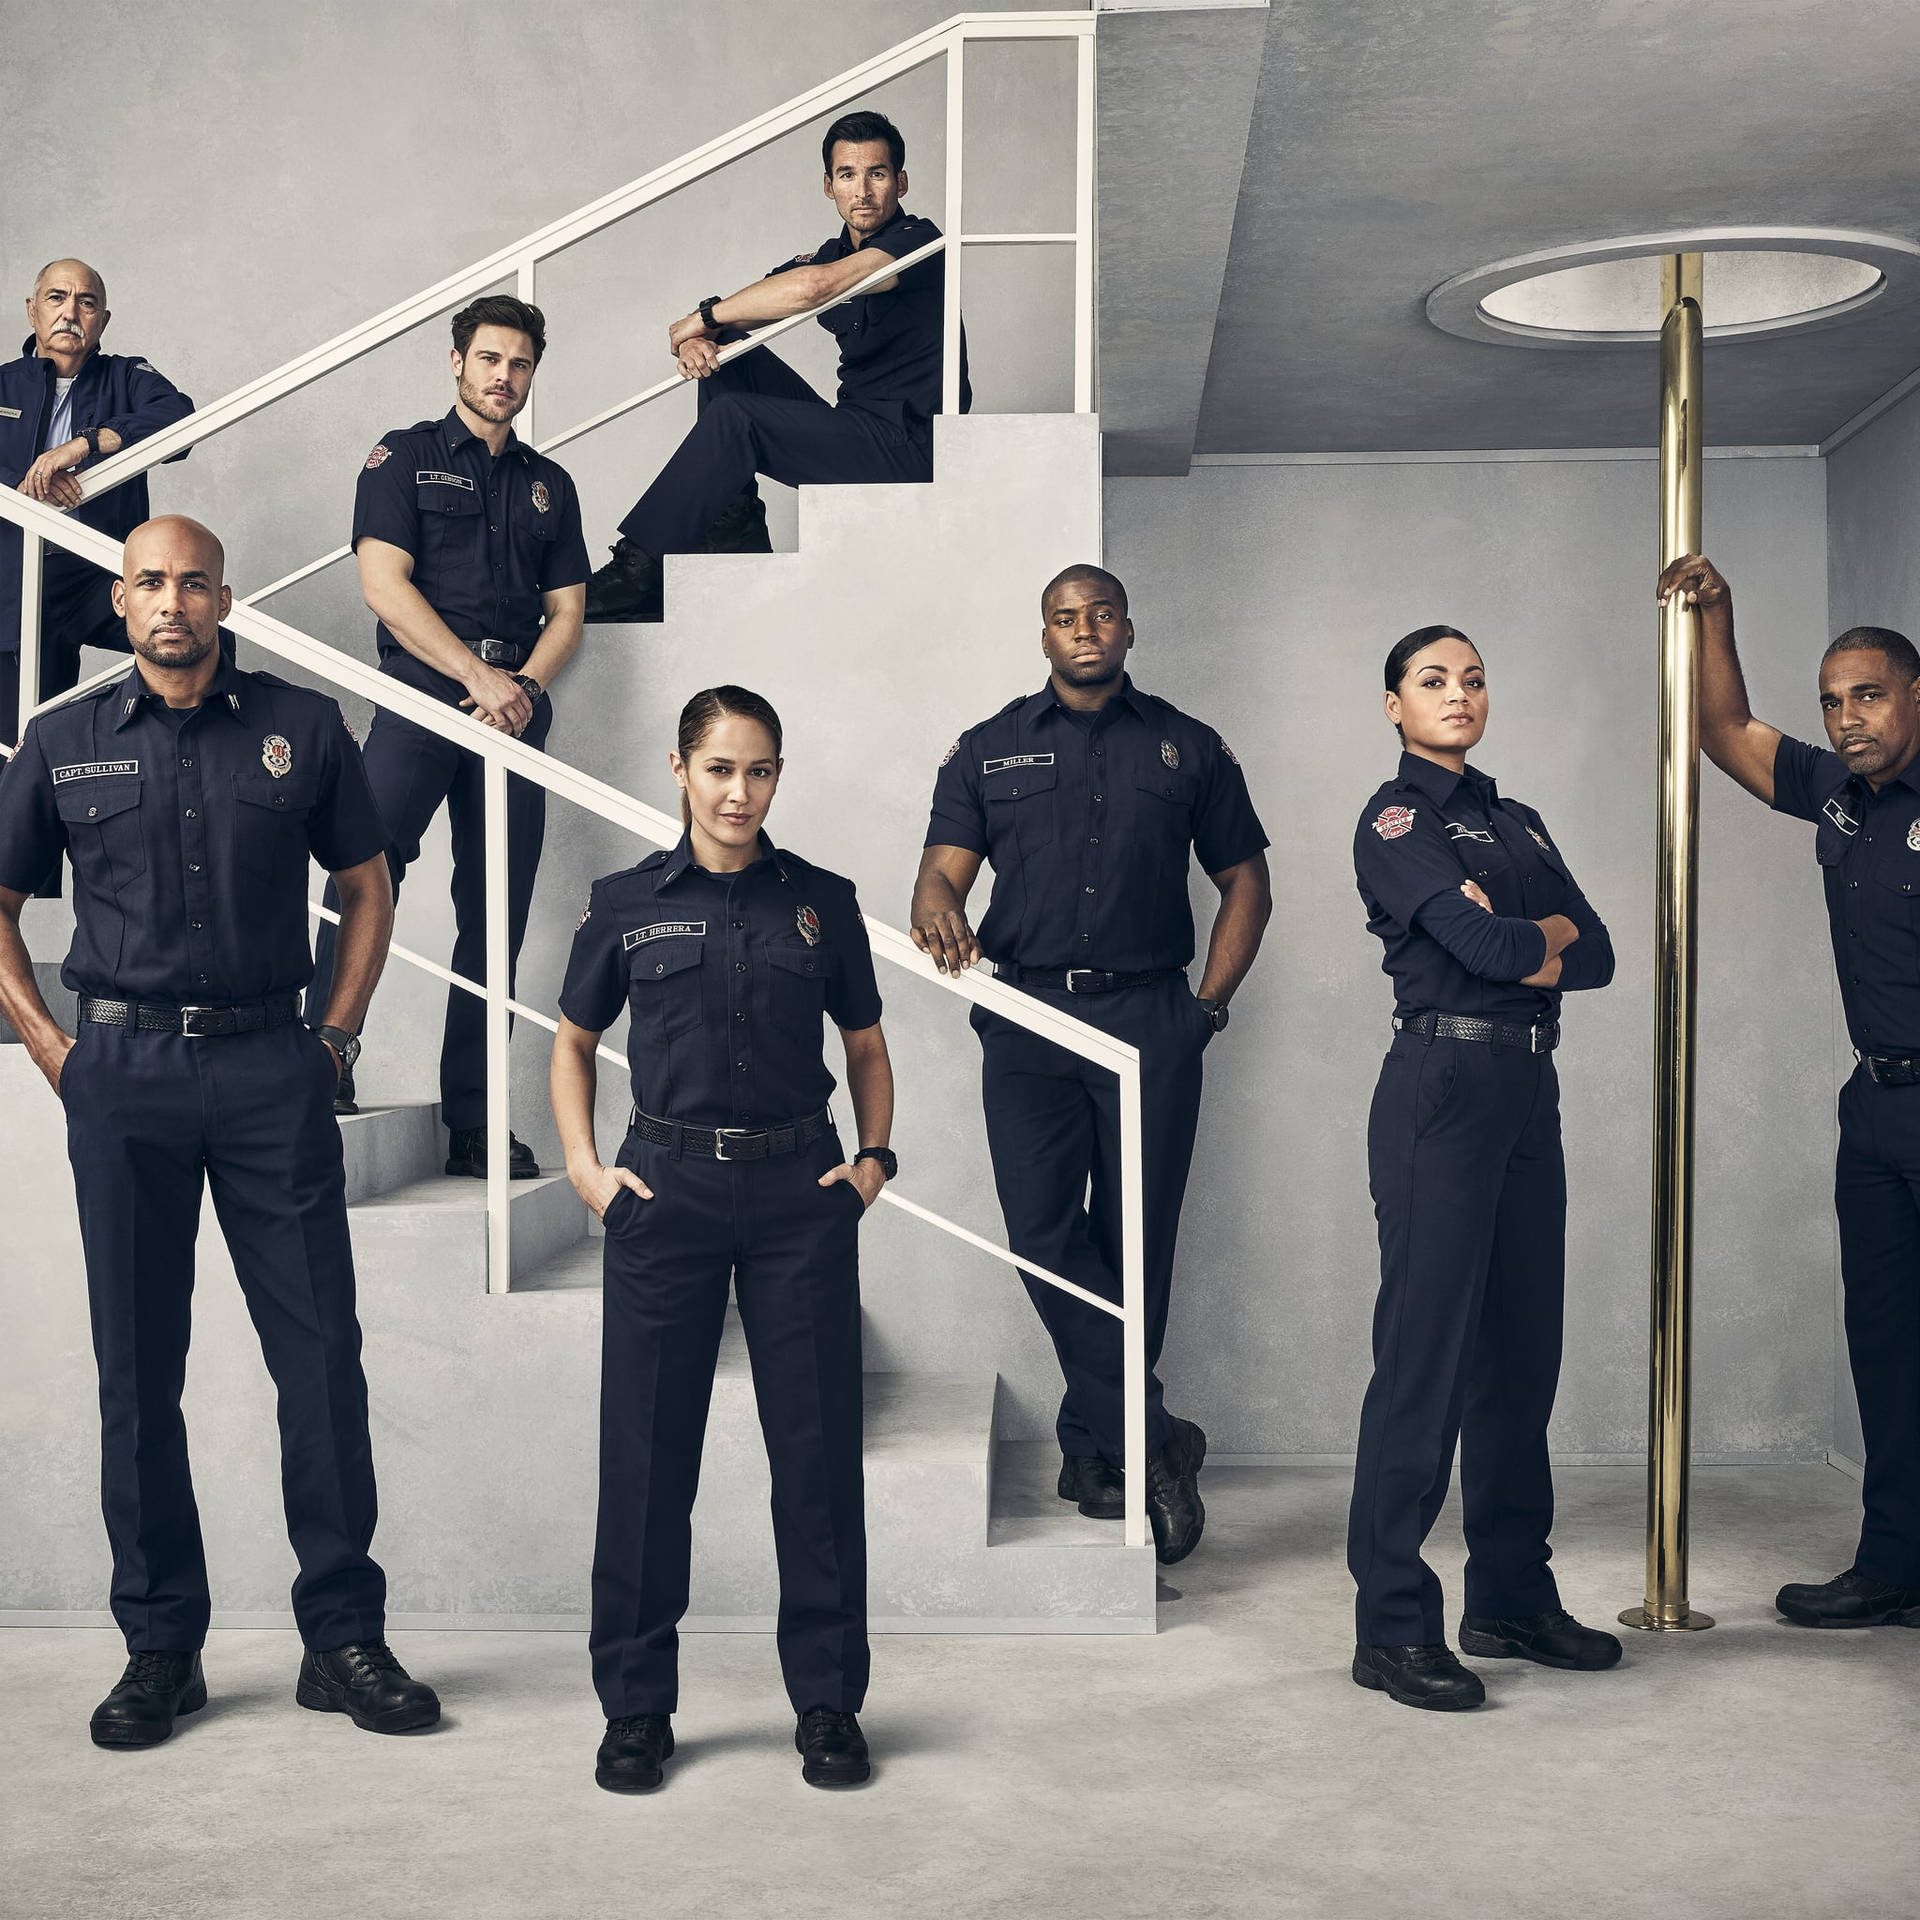 The Heroic Firefighters of Station 19 Wallpaper